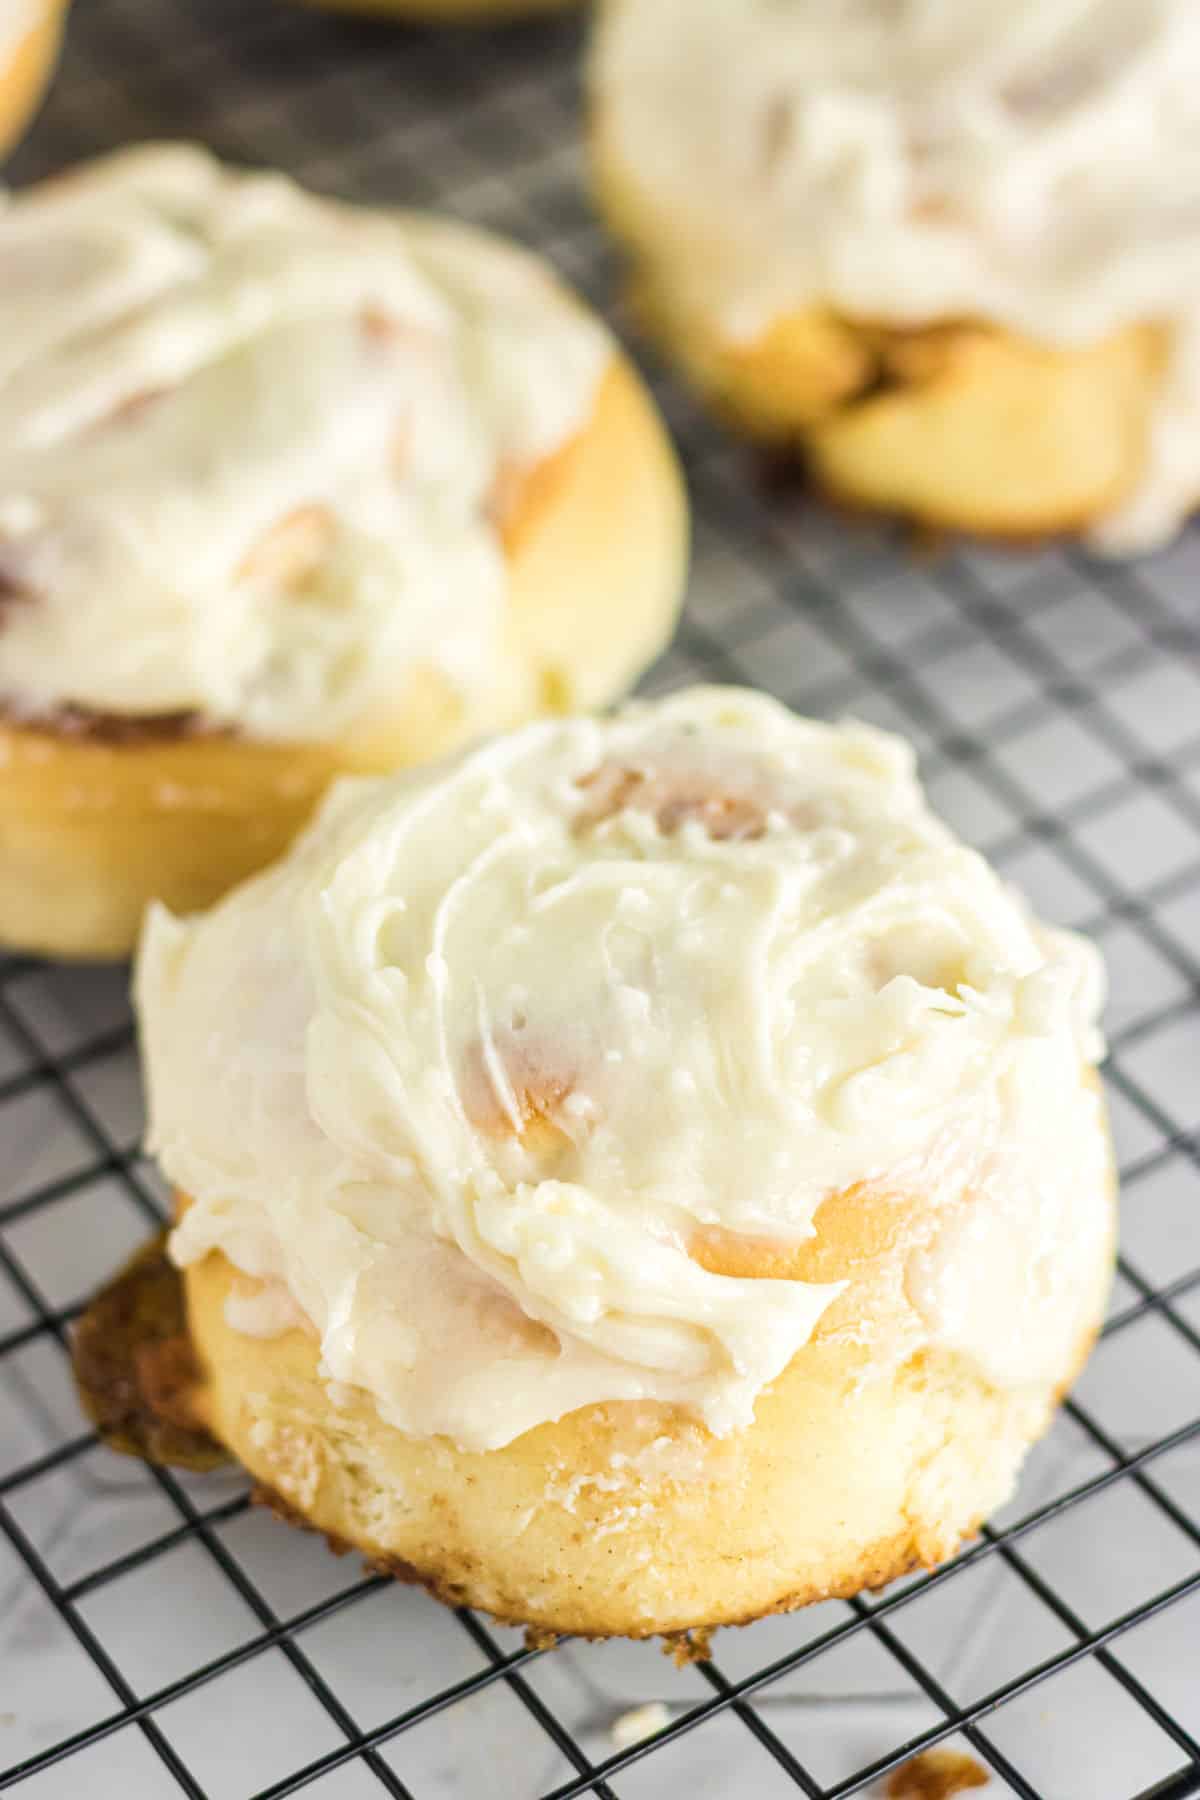 Closeup of a finished cinnamon roll with thick, creamy frosting on top.